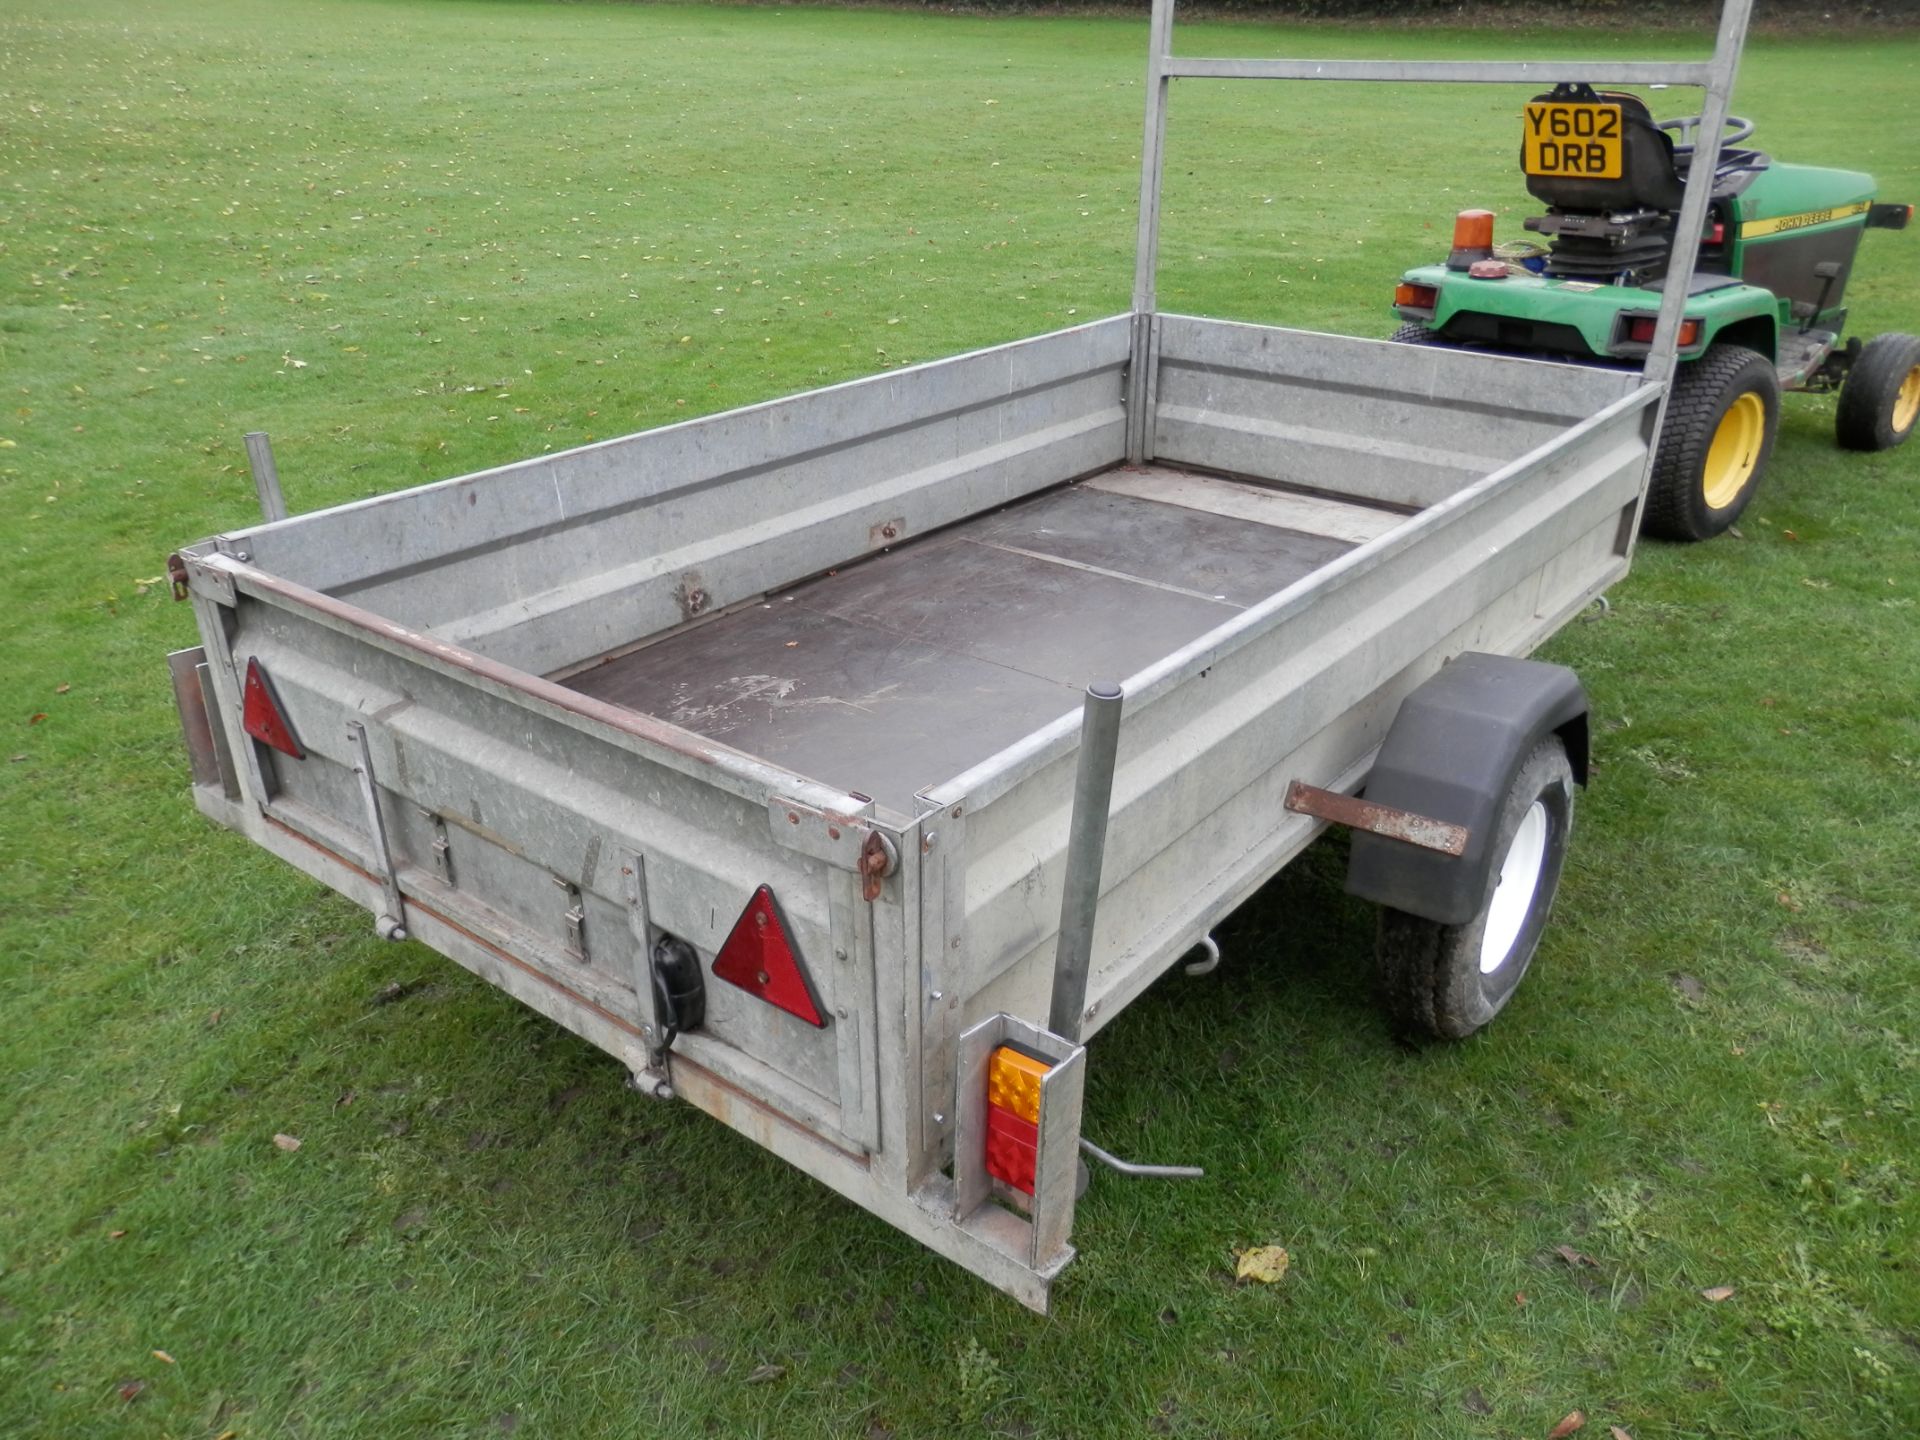 GOOD SOLID 8 X 4' GALVANIZED TRAILER, 1.5 TONNE. DROP REAR FOR EASY LOADING. - Image 3 of 9